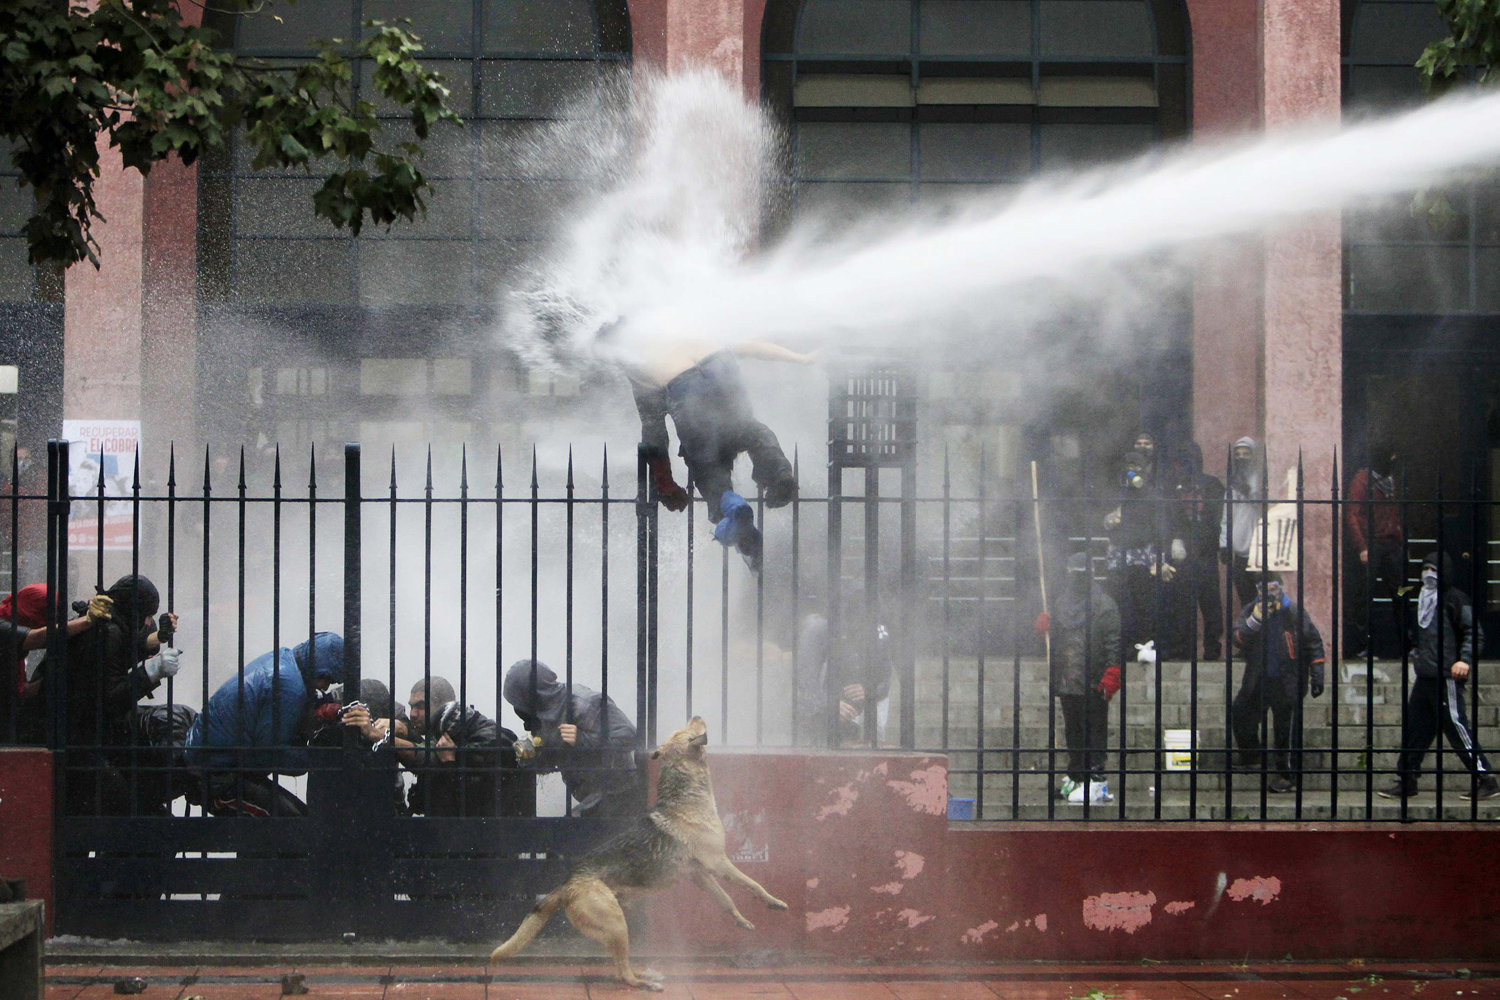 A student is hit by a jet of water sprayed by riot police during a protest against the government to demand changes in the public state education system, in Santiago